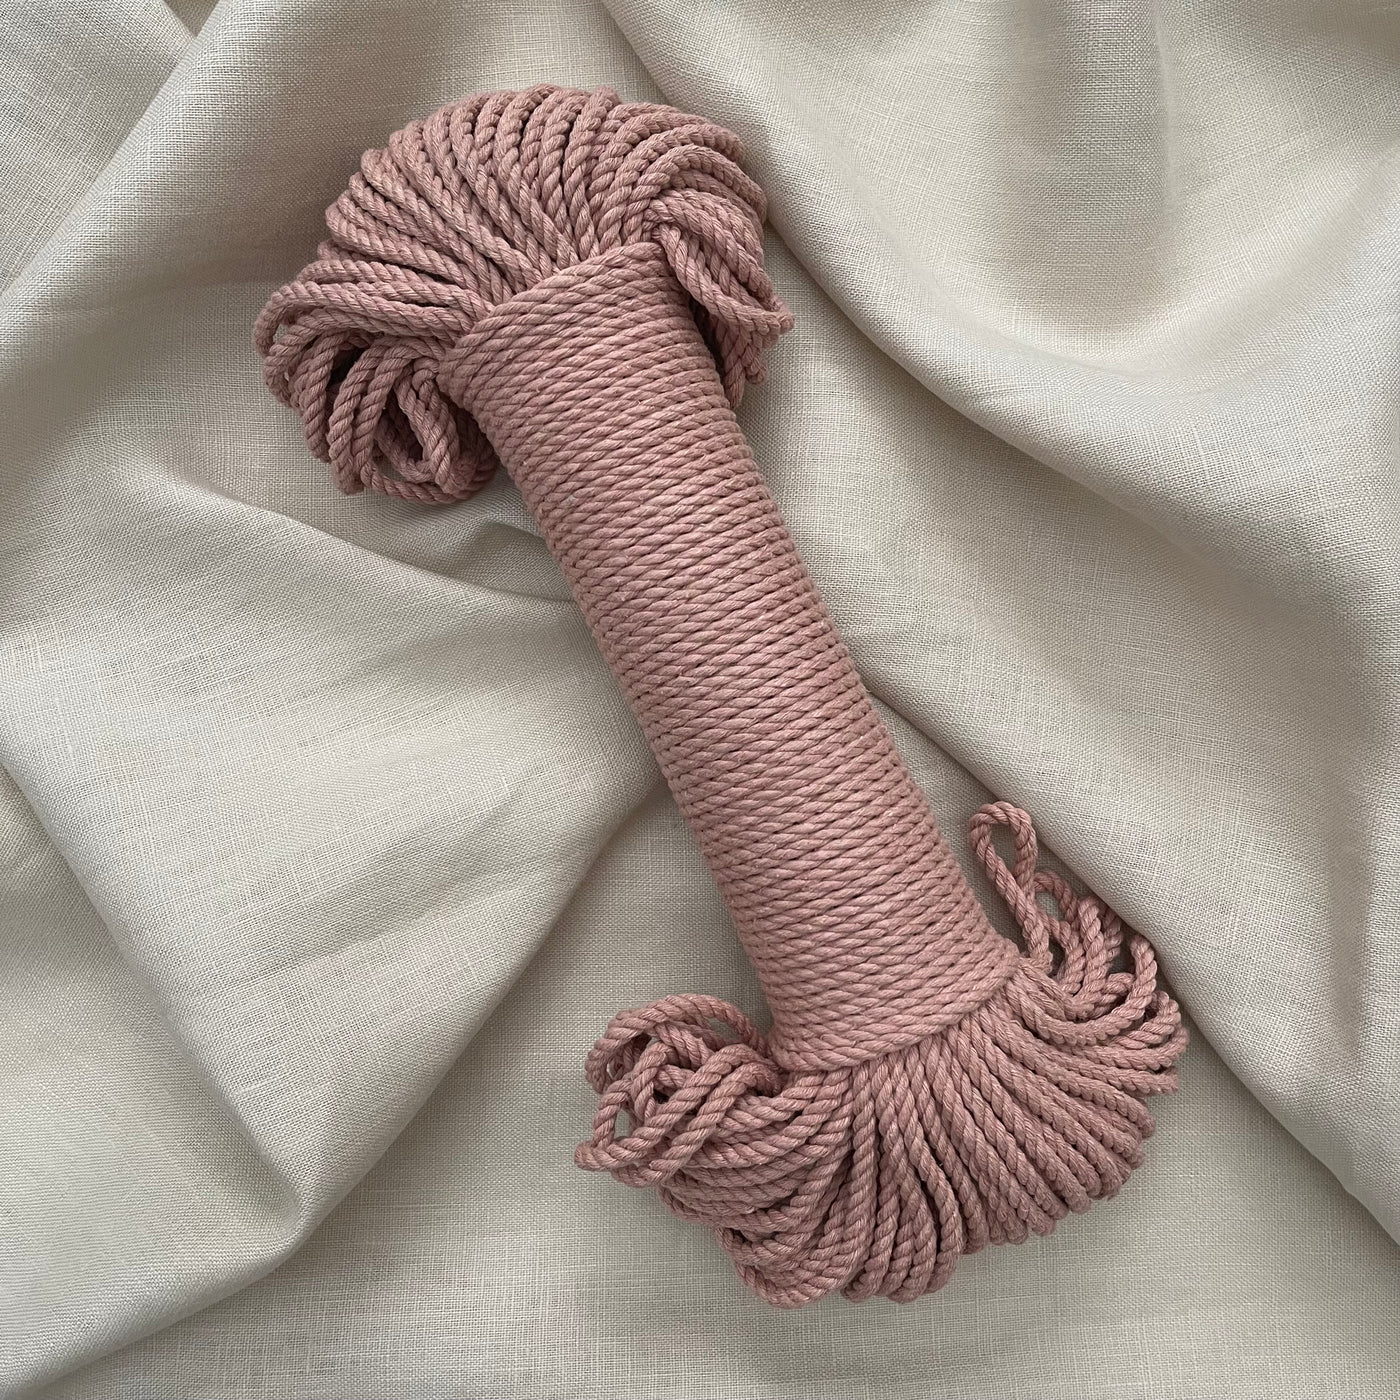 Macrame 3ply cotton rope 4mm in a classical 'Vintage Peach"' colour is a fantastic addition to your fibre collection and is perfect for macrame projects such as plant hangers or pieces that require that little bit of extra guts!